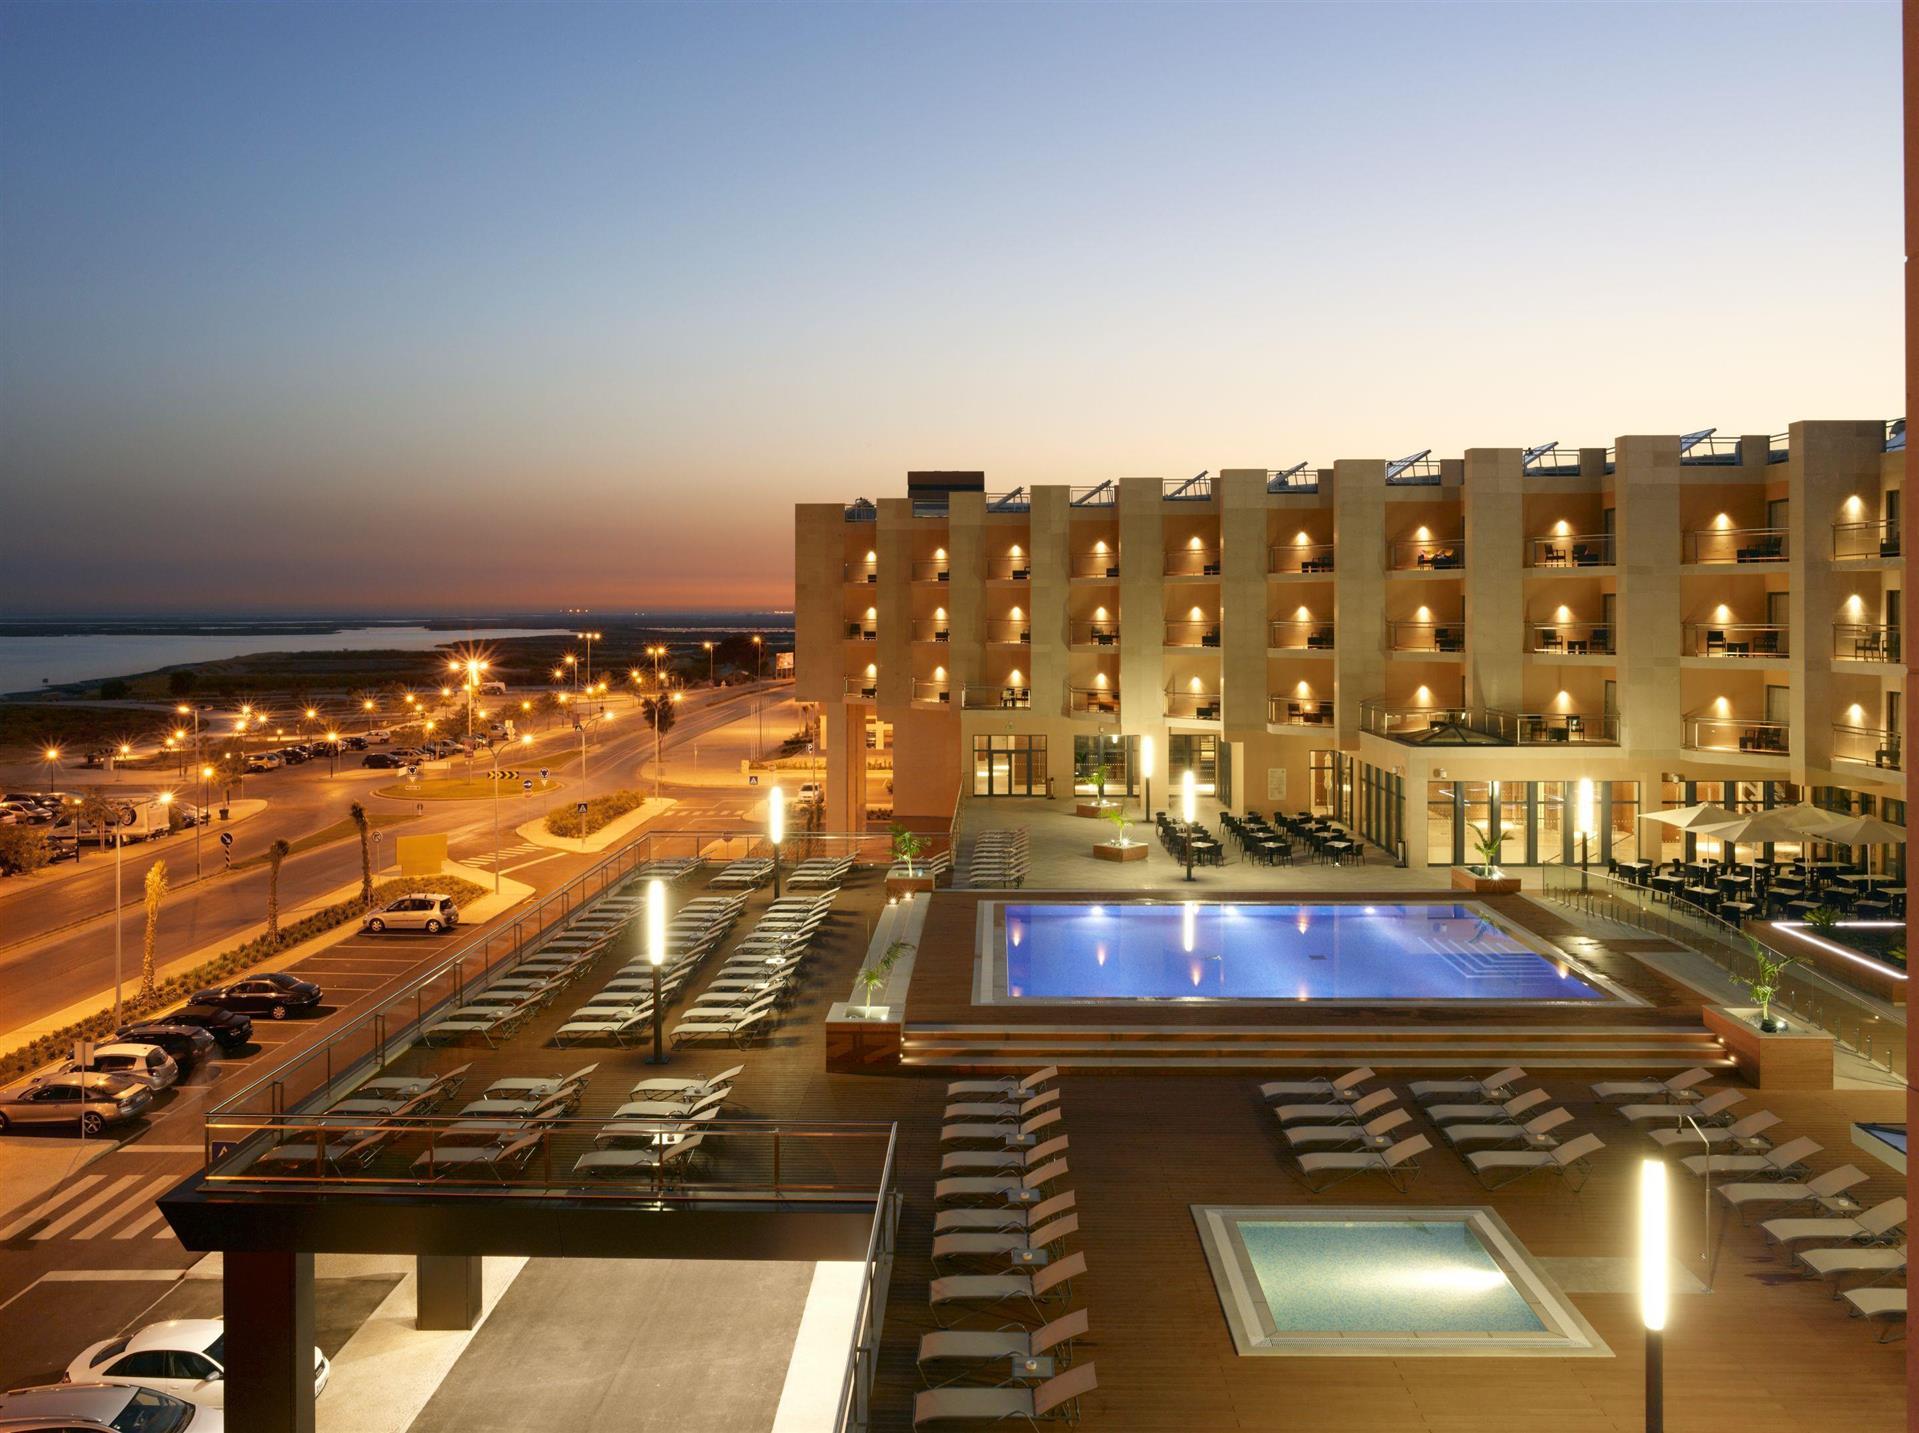 Real Marina Hotel & Spa in Olhao, PT